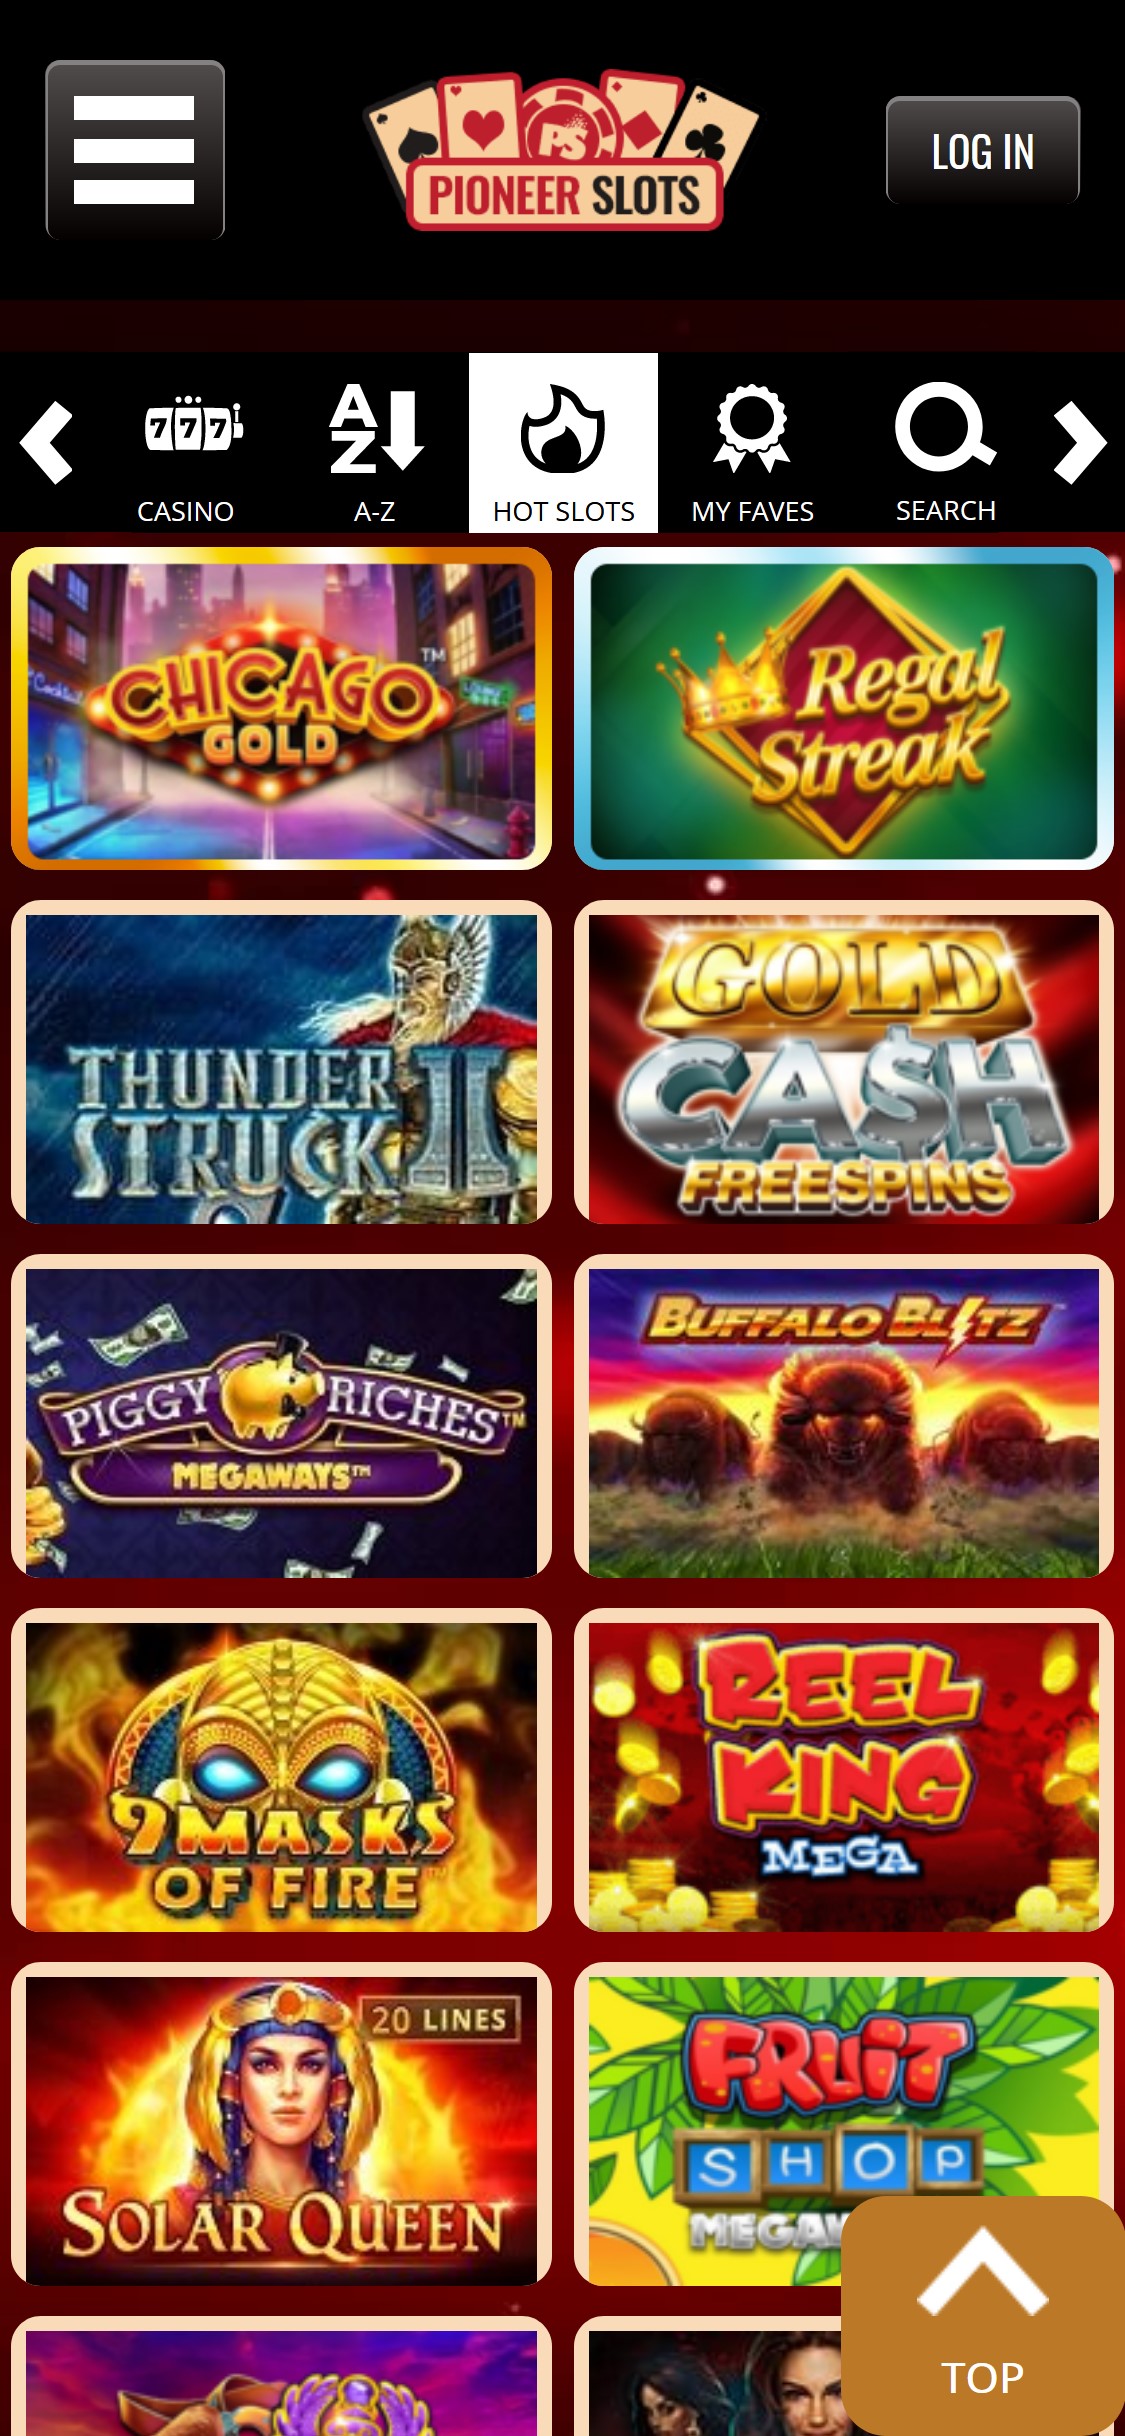 Pioneer Slots Casino Mobile Games Review